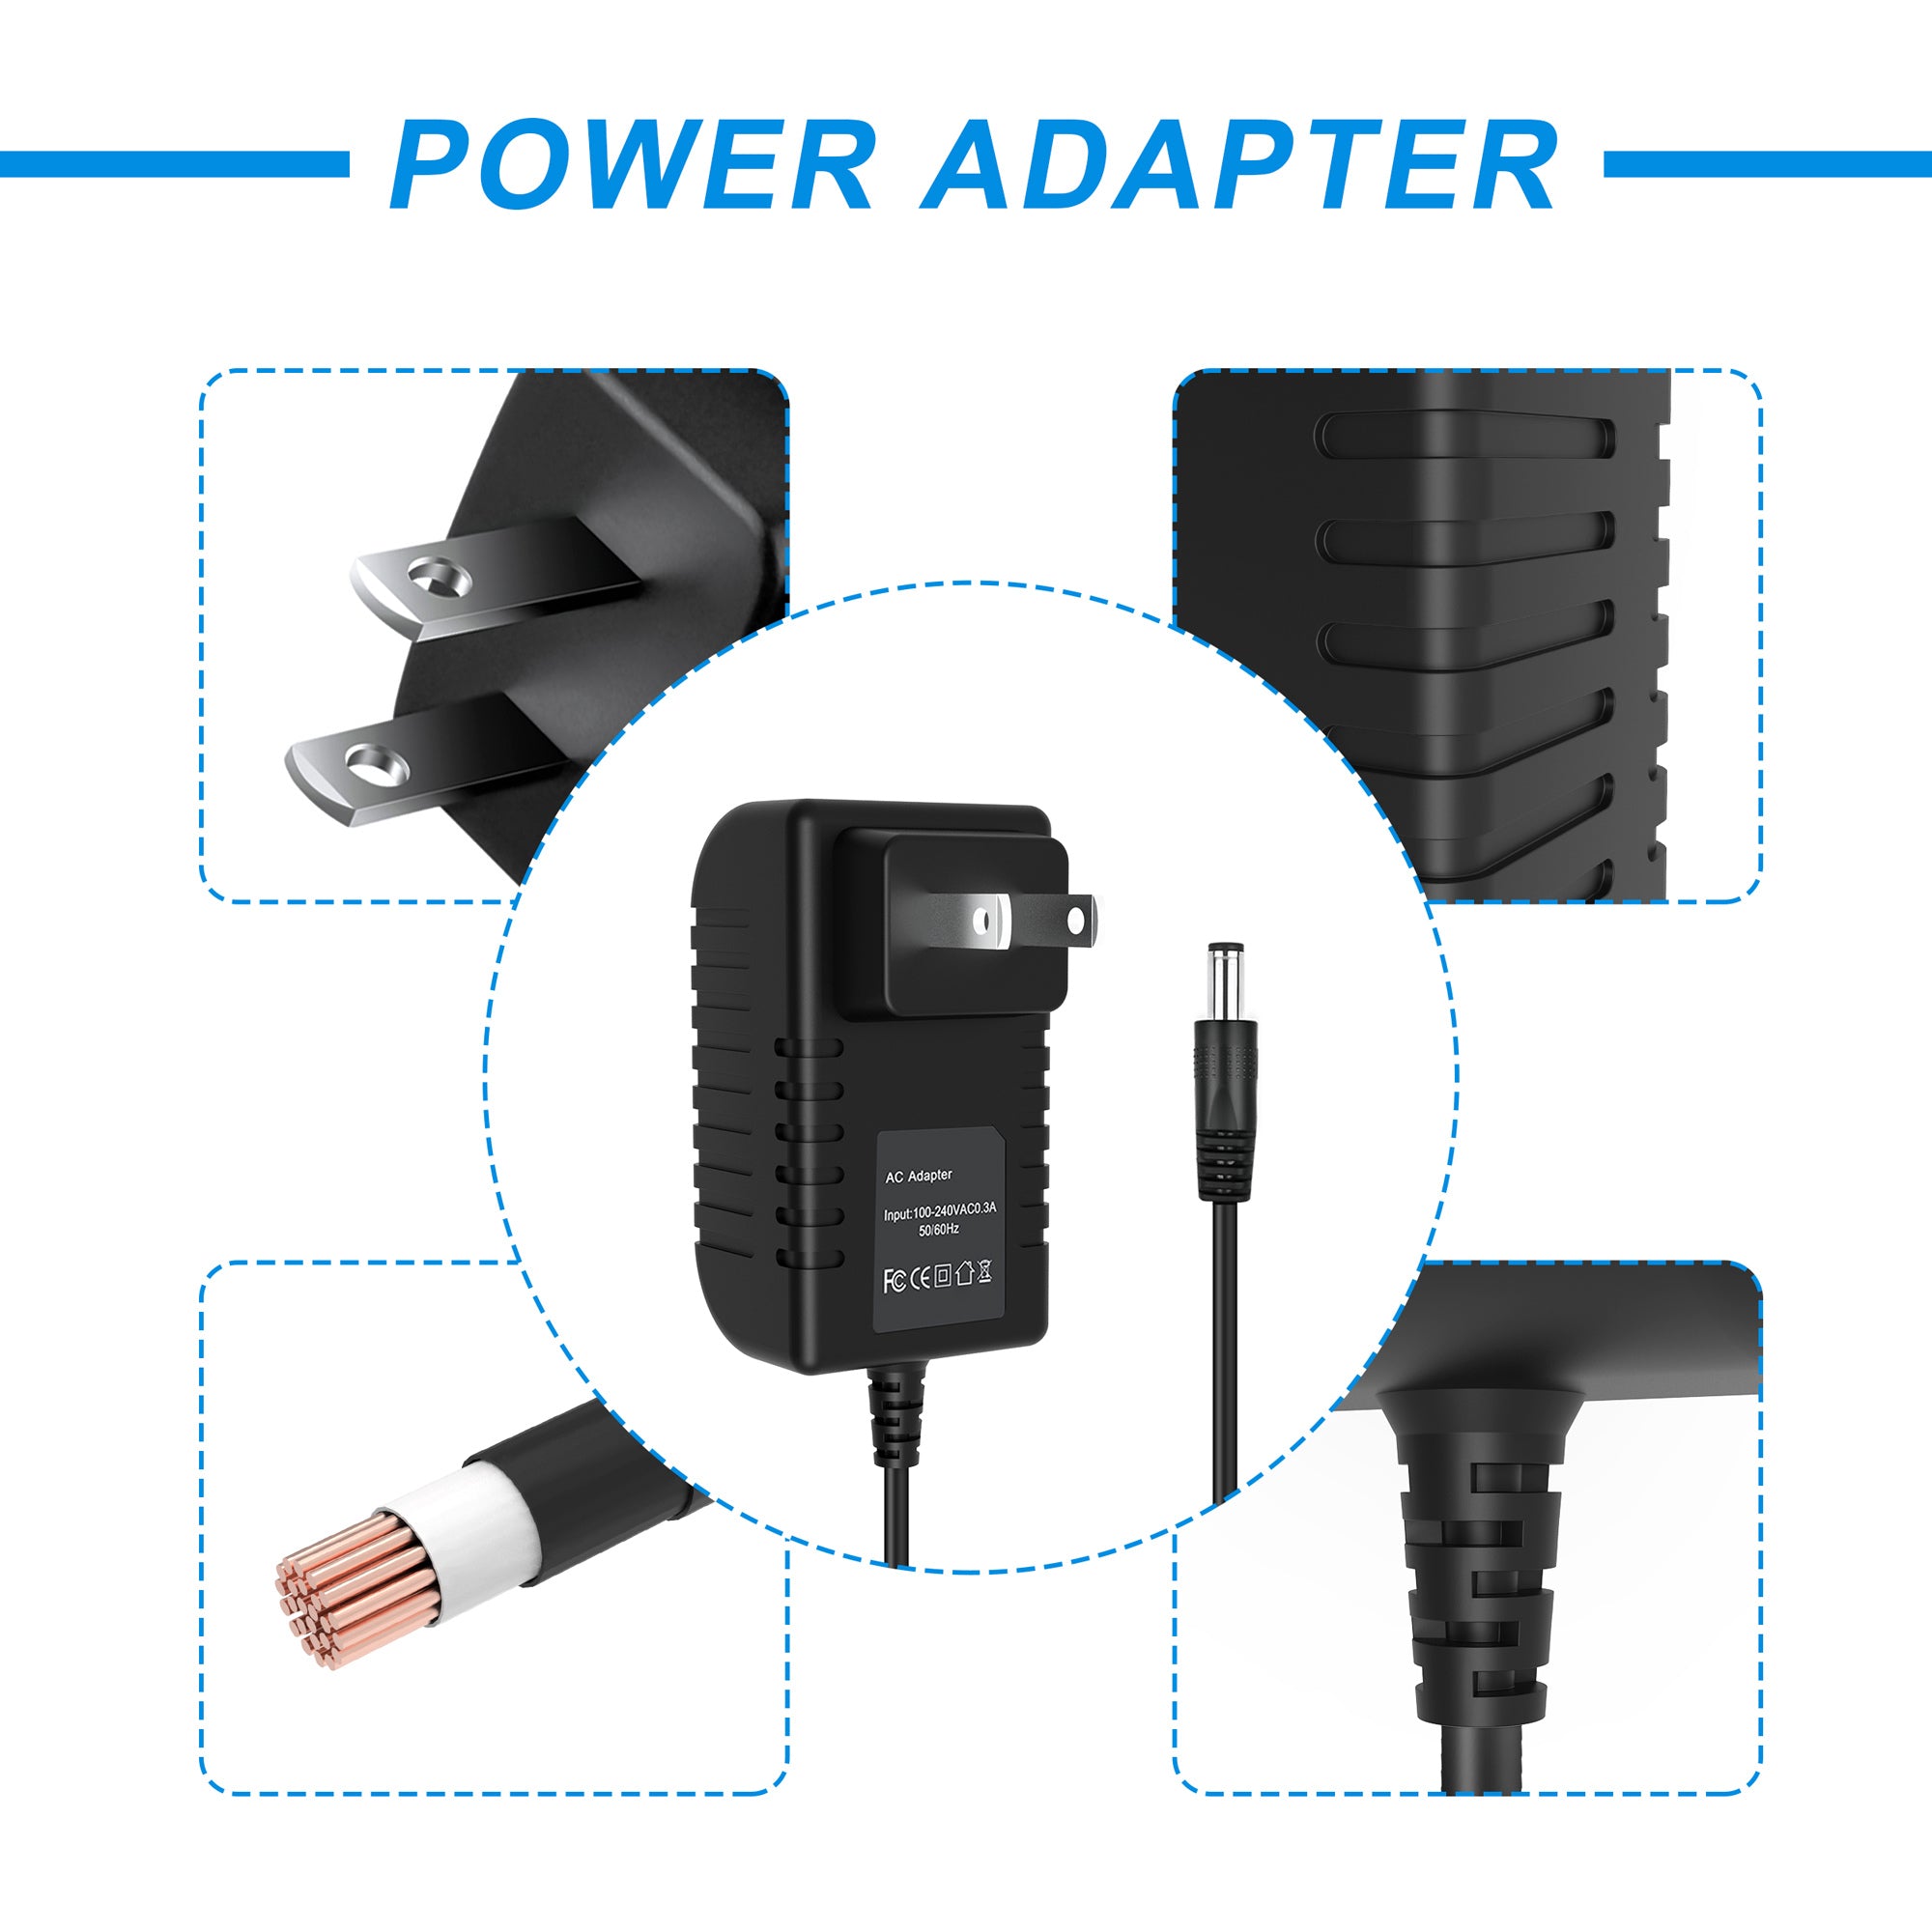 AbleGrid 12V AC/DC Adapter Compatible with Sony SMP-N200 SMPN200 Digital HD Media Streamer Network Streaming Media Player Power Supply Cord Cable Wall Charger Mains PSU